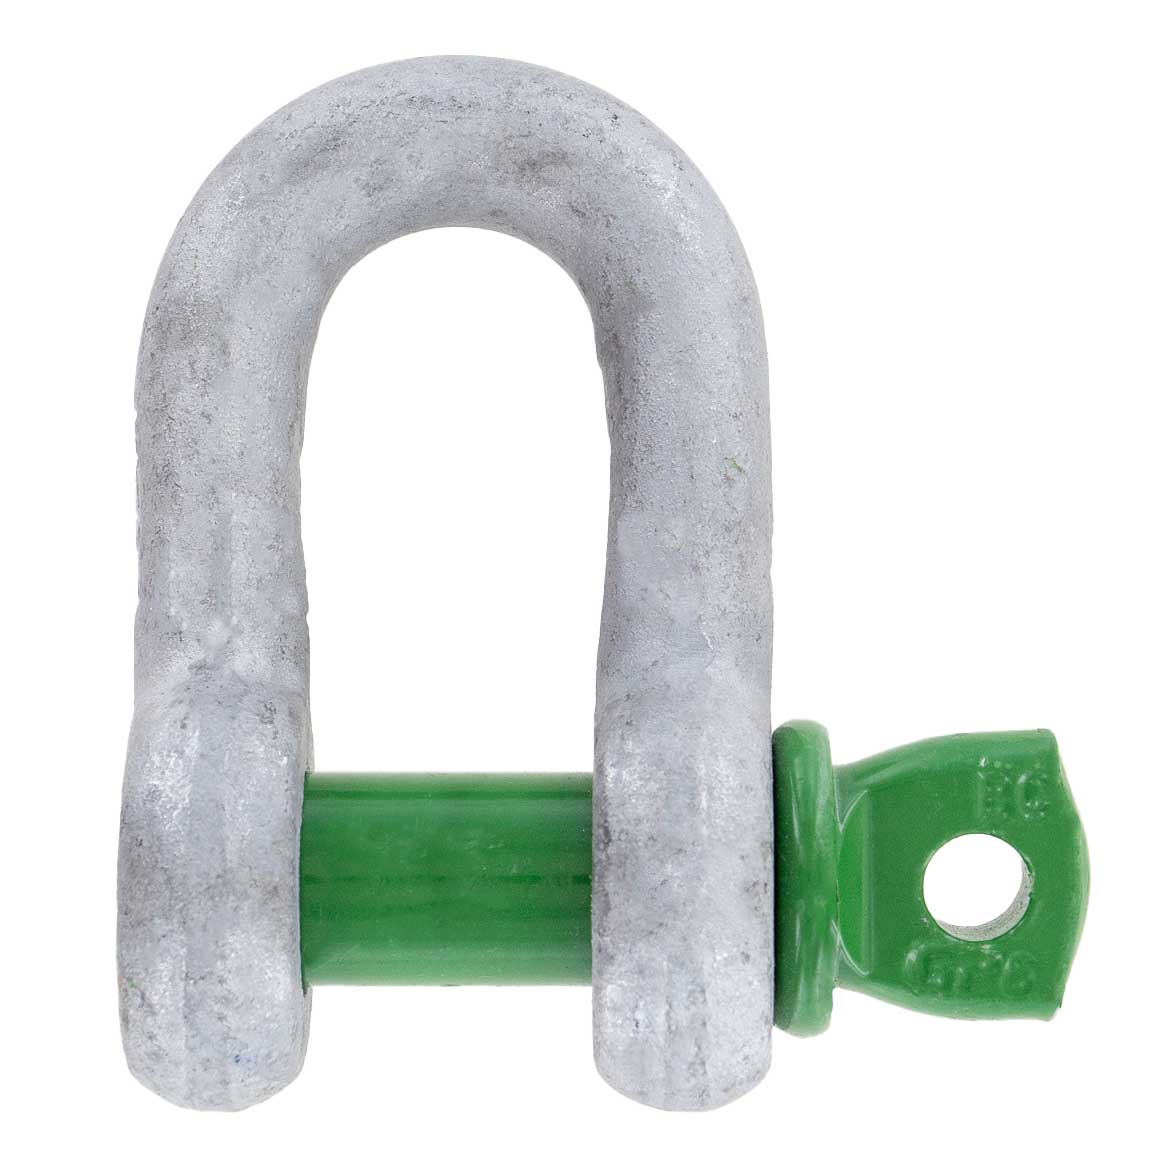 7/8" Van Beest Green Pin® Screw Pin Chain Shackle | G-4151 - 6.5 Ton primary image